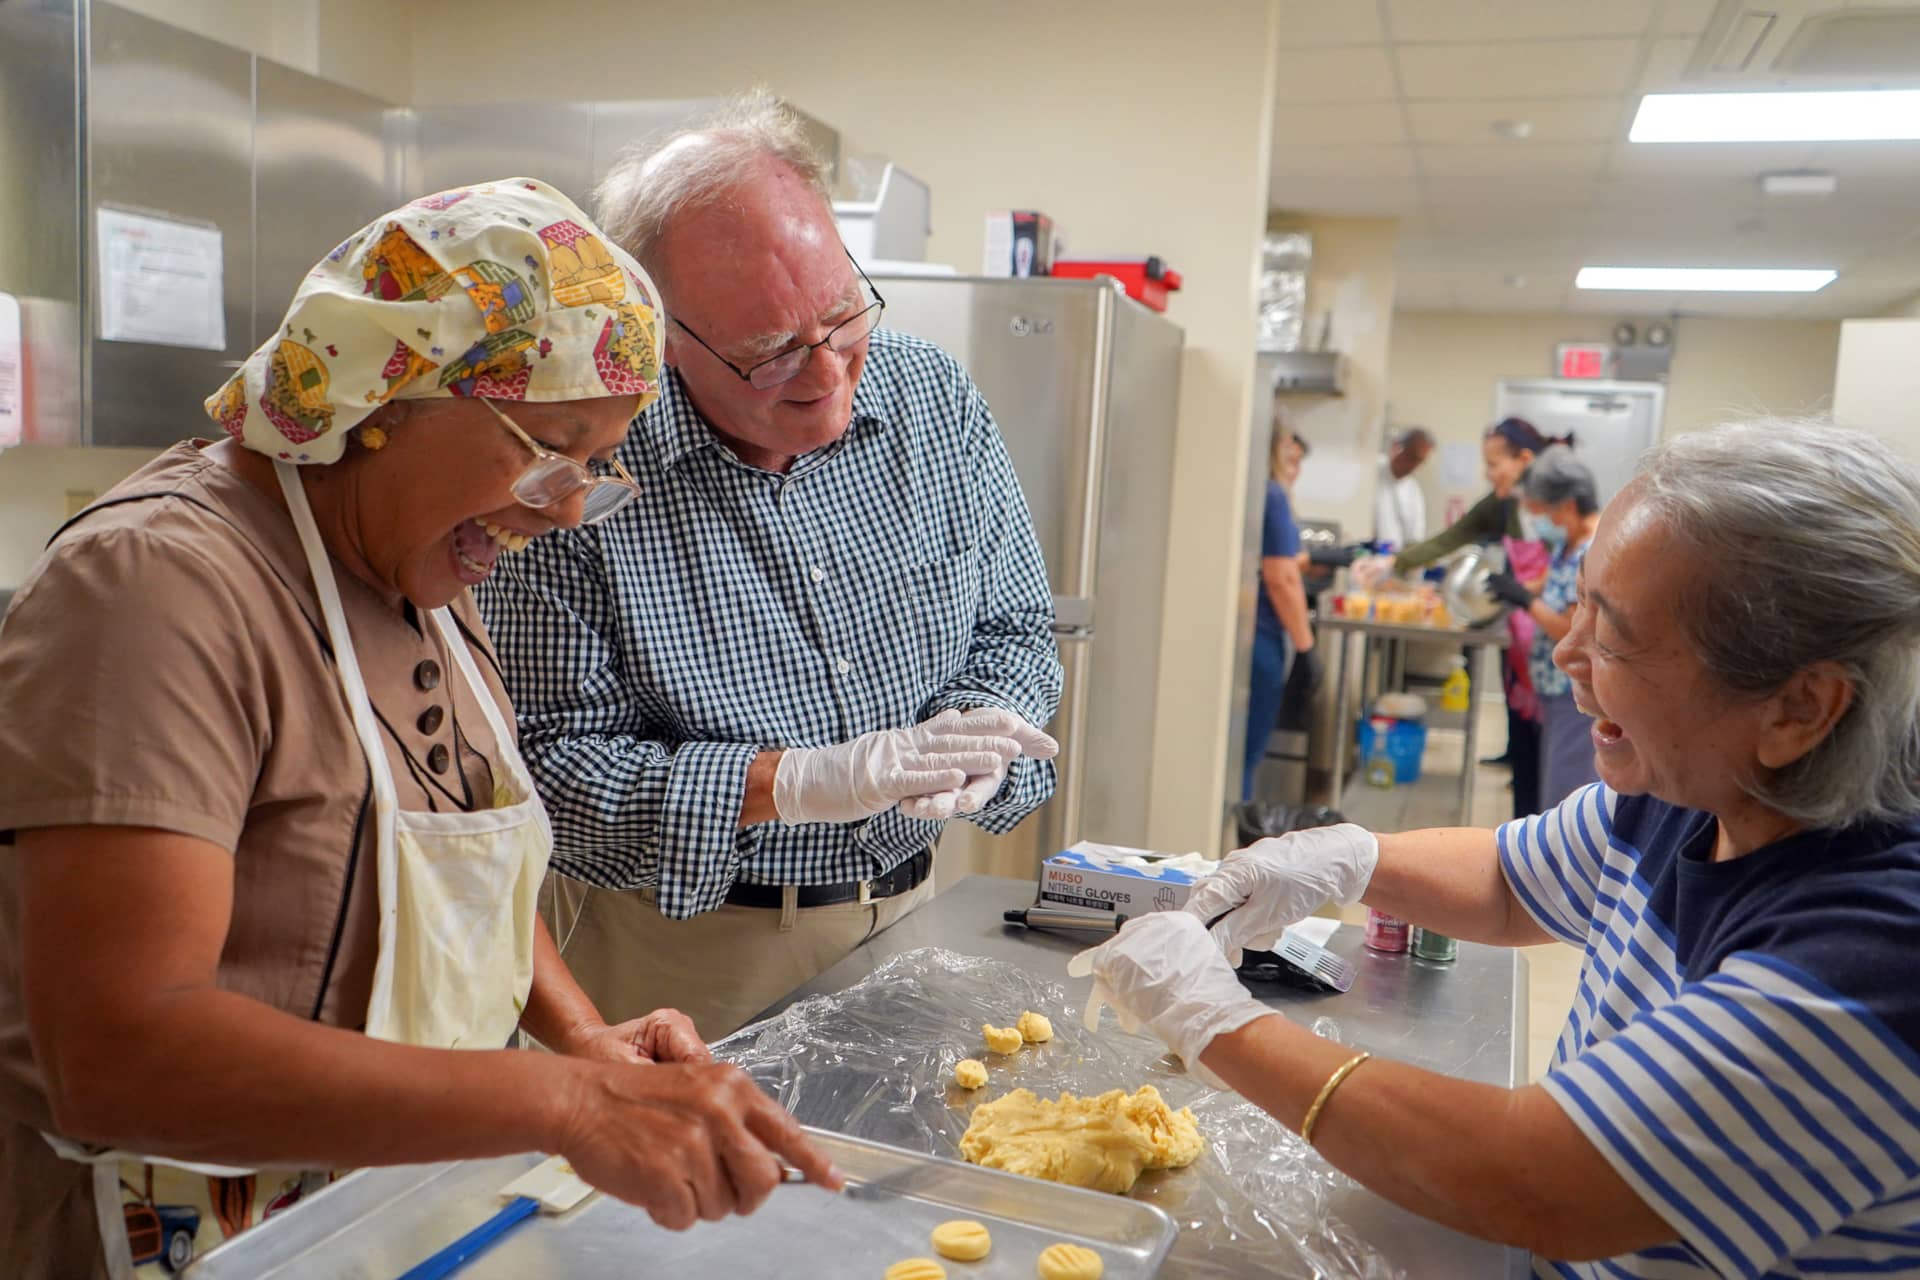 Participants of the Nihi ta Fanmama’tinas (Let’s Cook): Reducing Added Sugars Workshop on Nov. 16 at the University of Guam share a laugh while learning to make whole-wheat rosketti.  